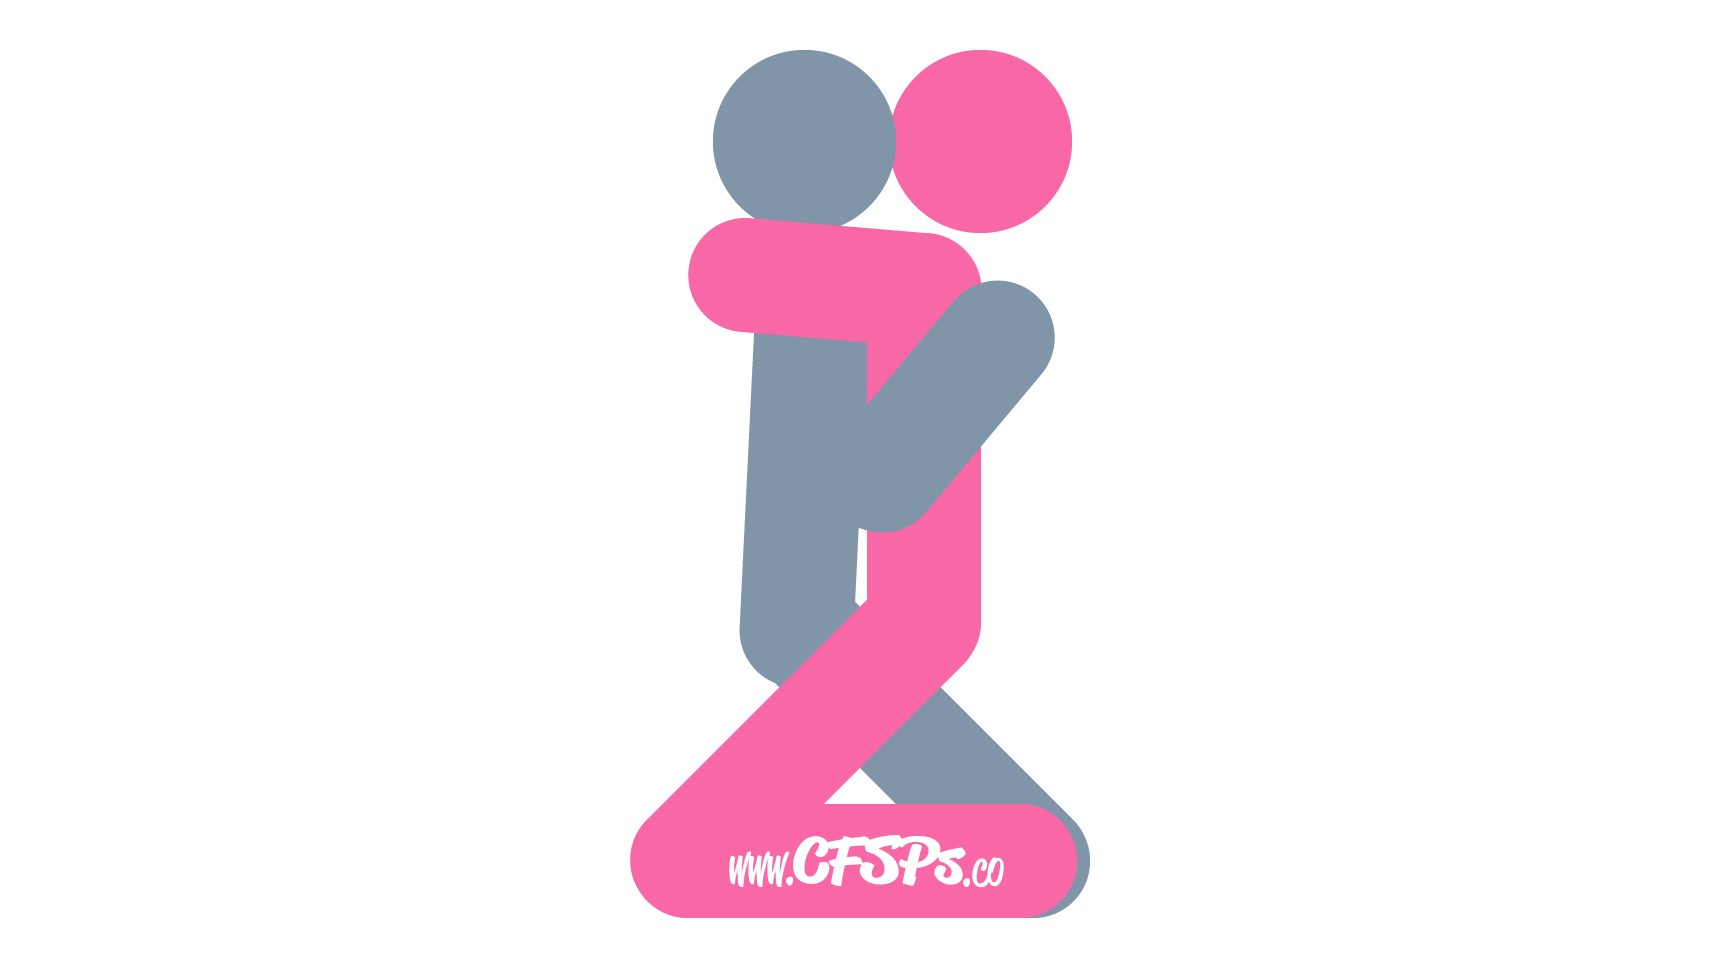 This stick figure image depicts a man and woman having sex in the Kneel sex position. The man is kneeling and sitting back about halfway down. The woman is straddling his pelvis by kneeling with her legs outside of his and her knees on the floor near his calves.